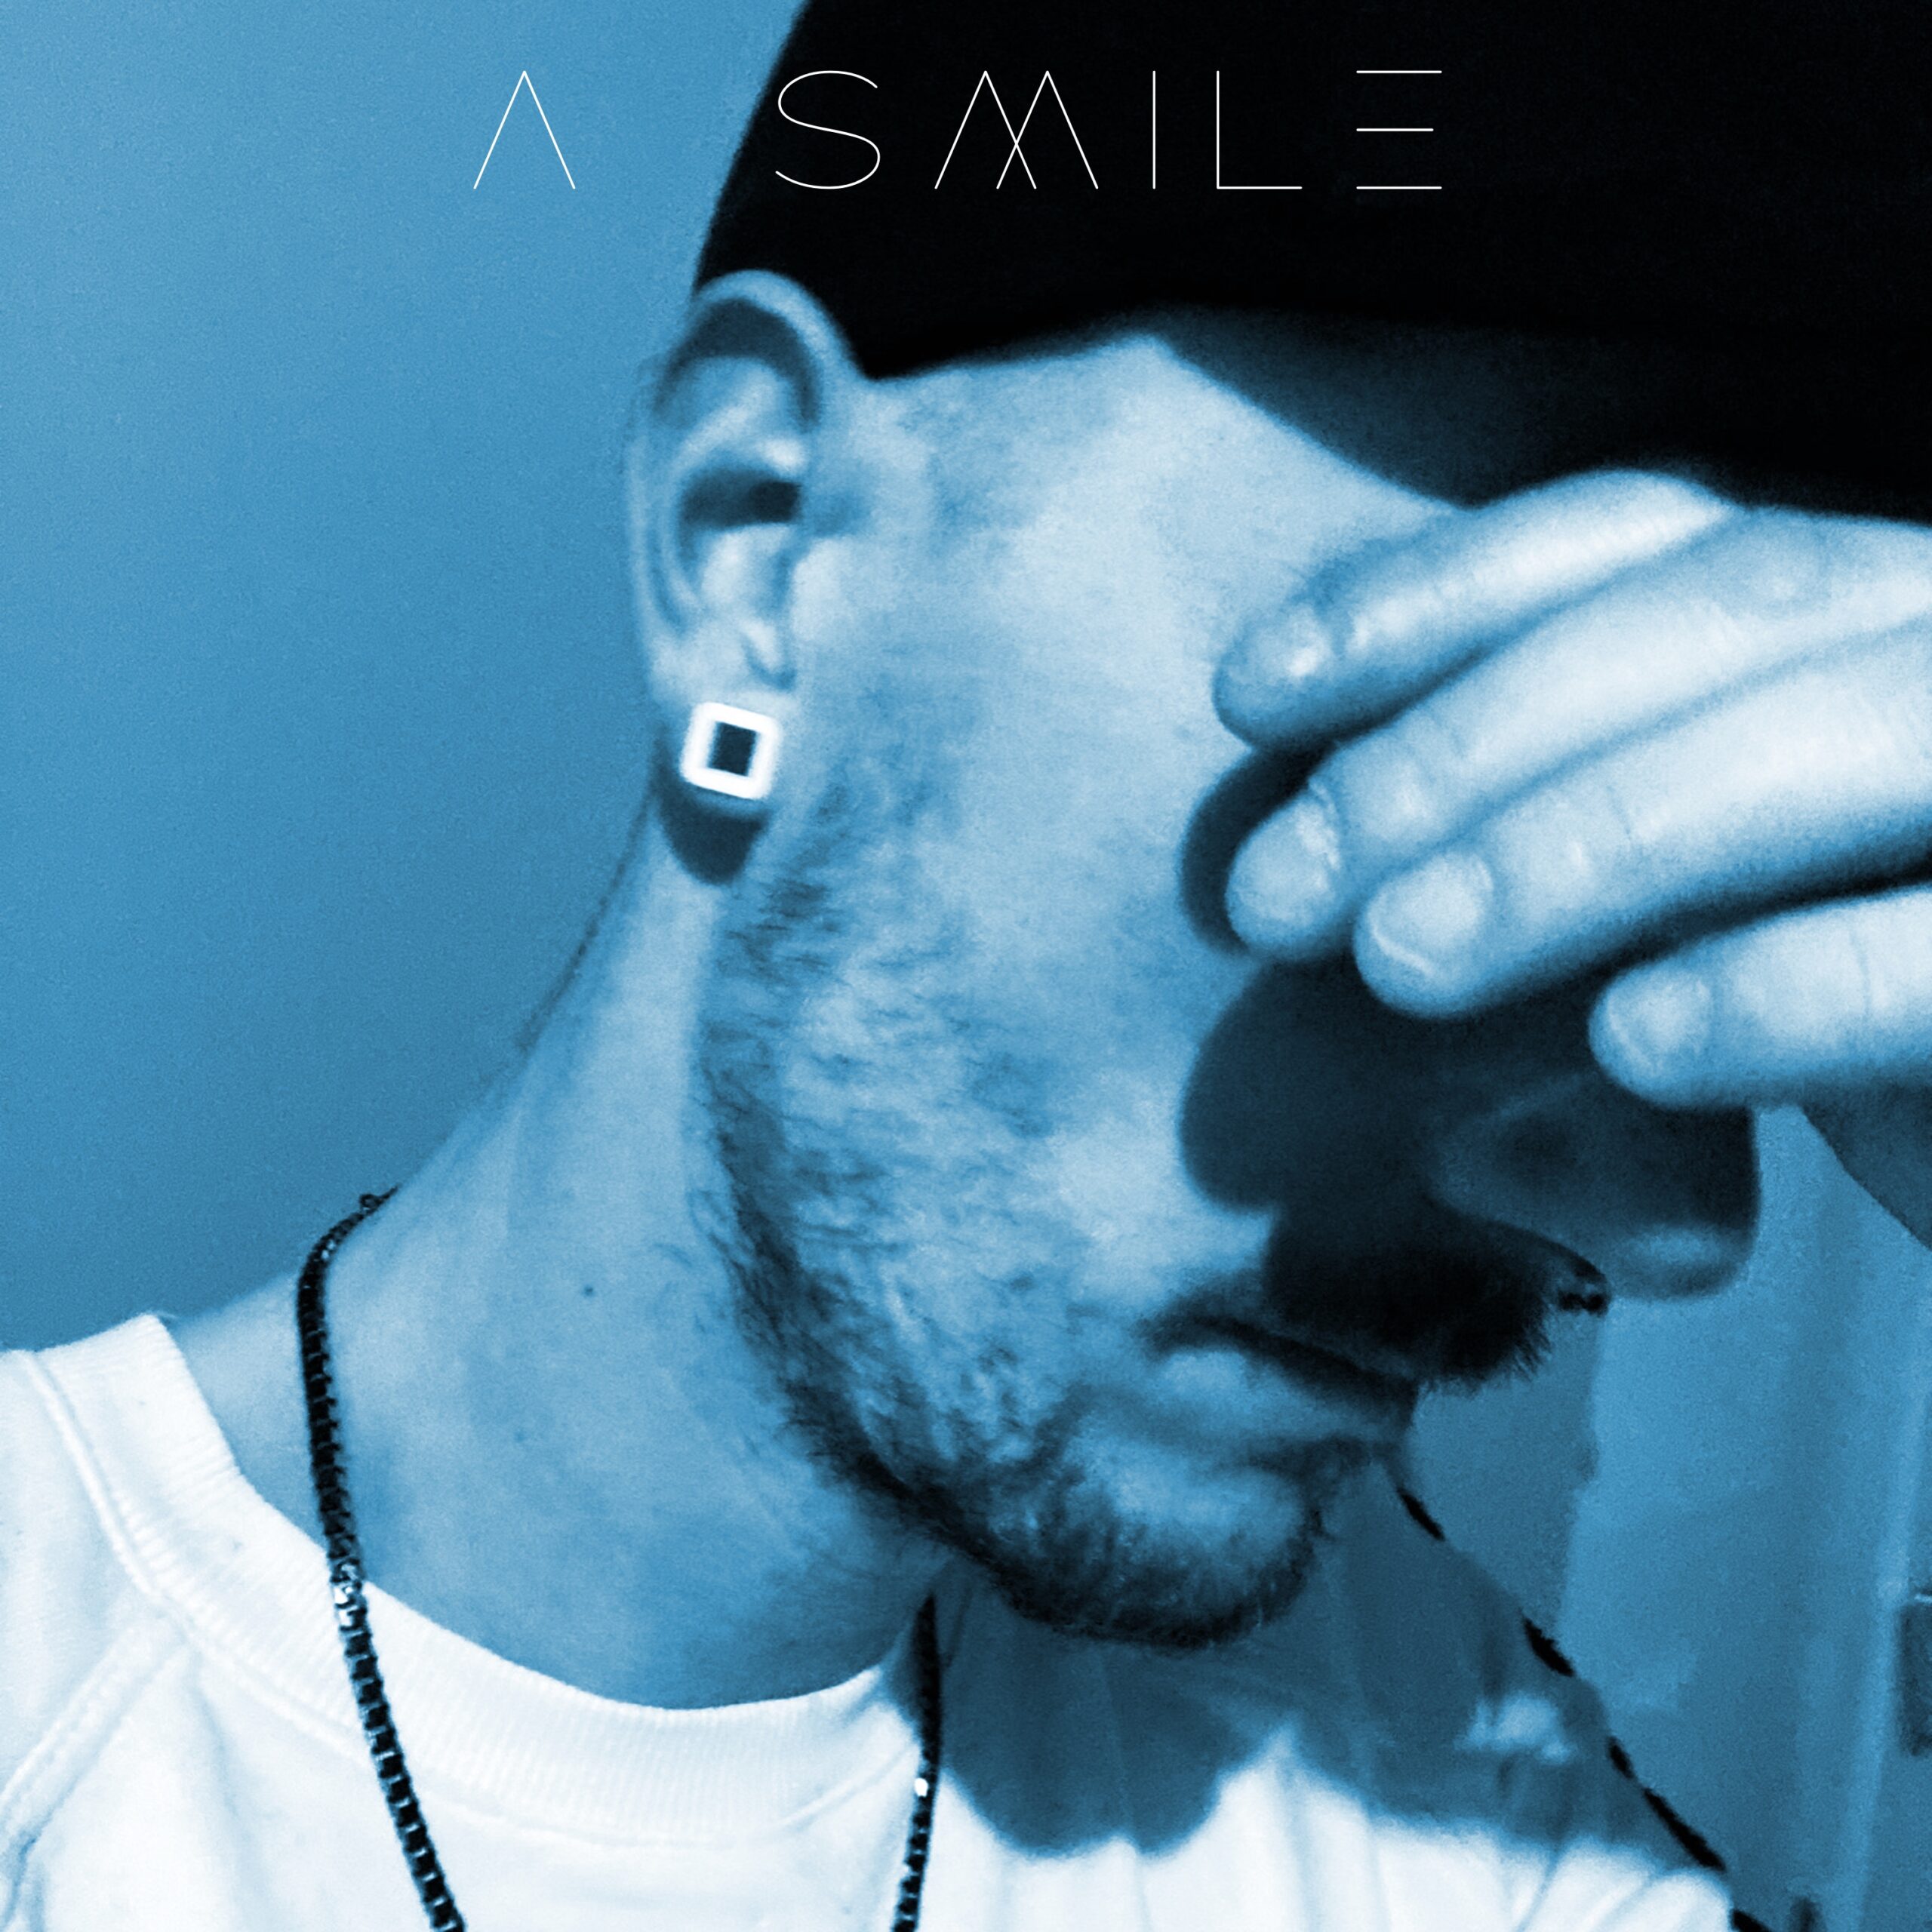 A Smile -chineese chingchong #chinese nzsuc #pop electro aus Nuremberg, Germany by Tommy Warzecha